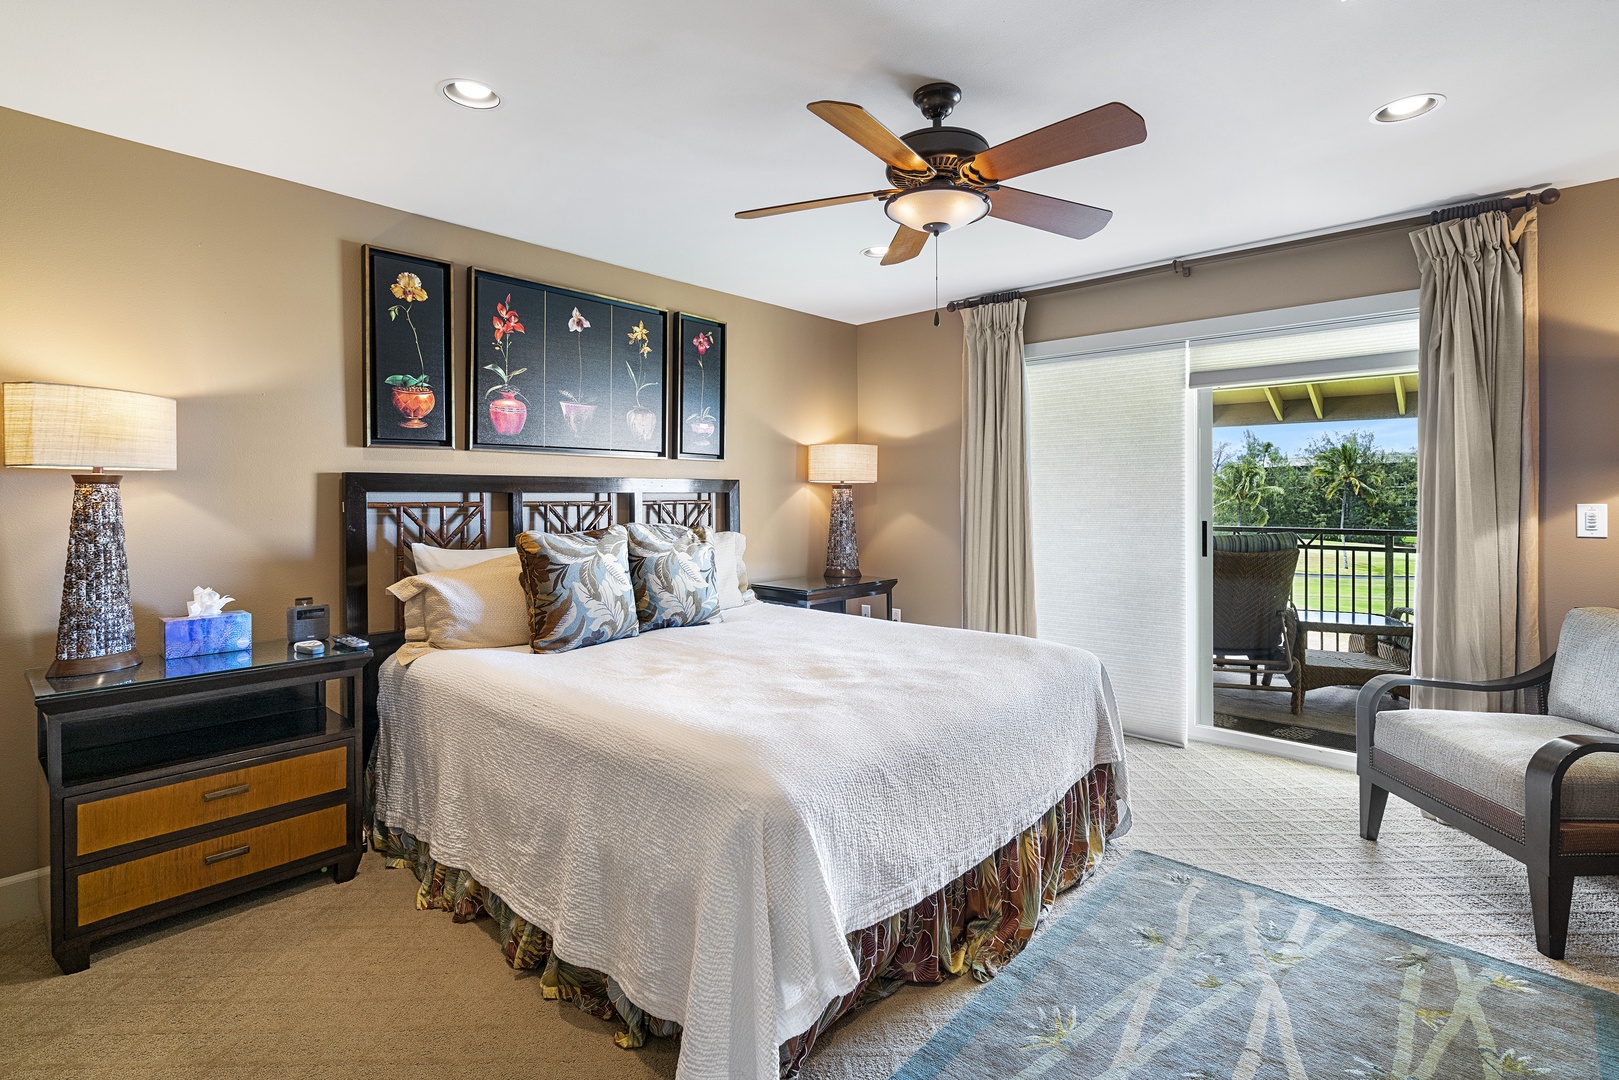 Waikoloa Vacation Rentals, Hali'i Kai at Waikoloa Beach Resort 9F - Primary bedroom featuring Cable TV, Central A/C and private Lanai!